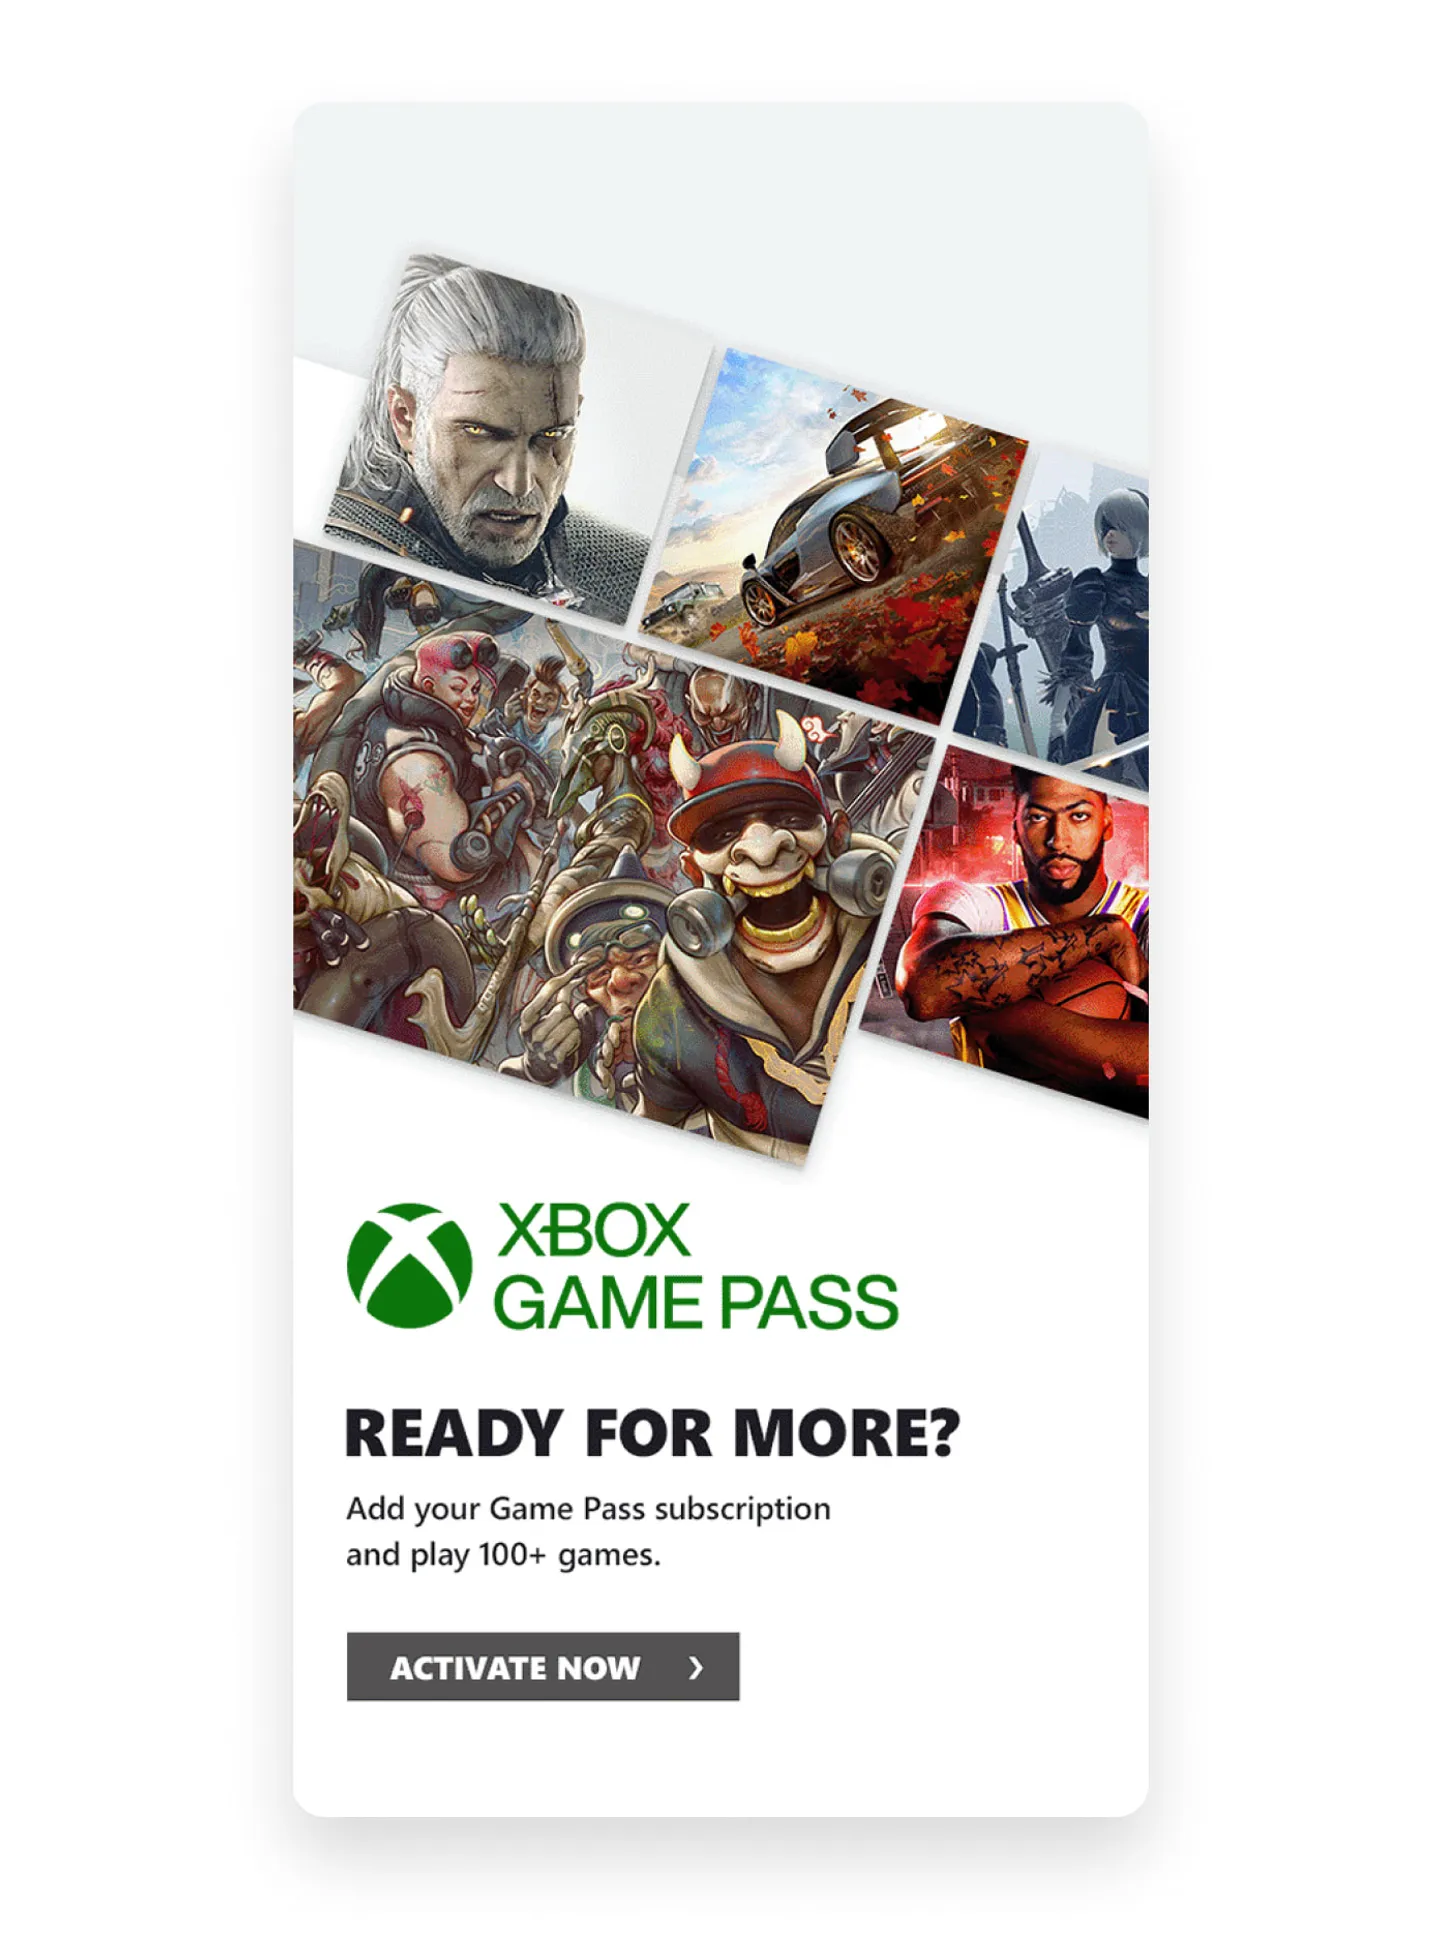 Email content section featuring Xbox Game Pass